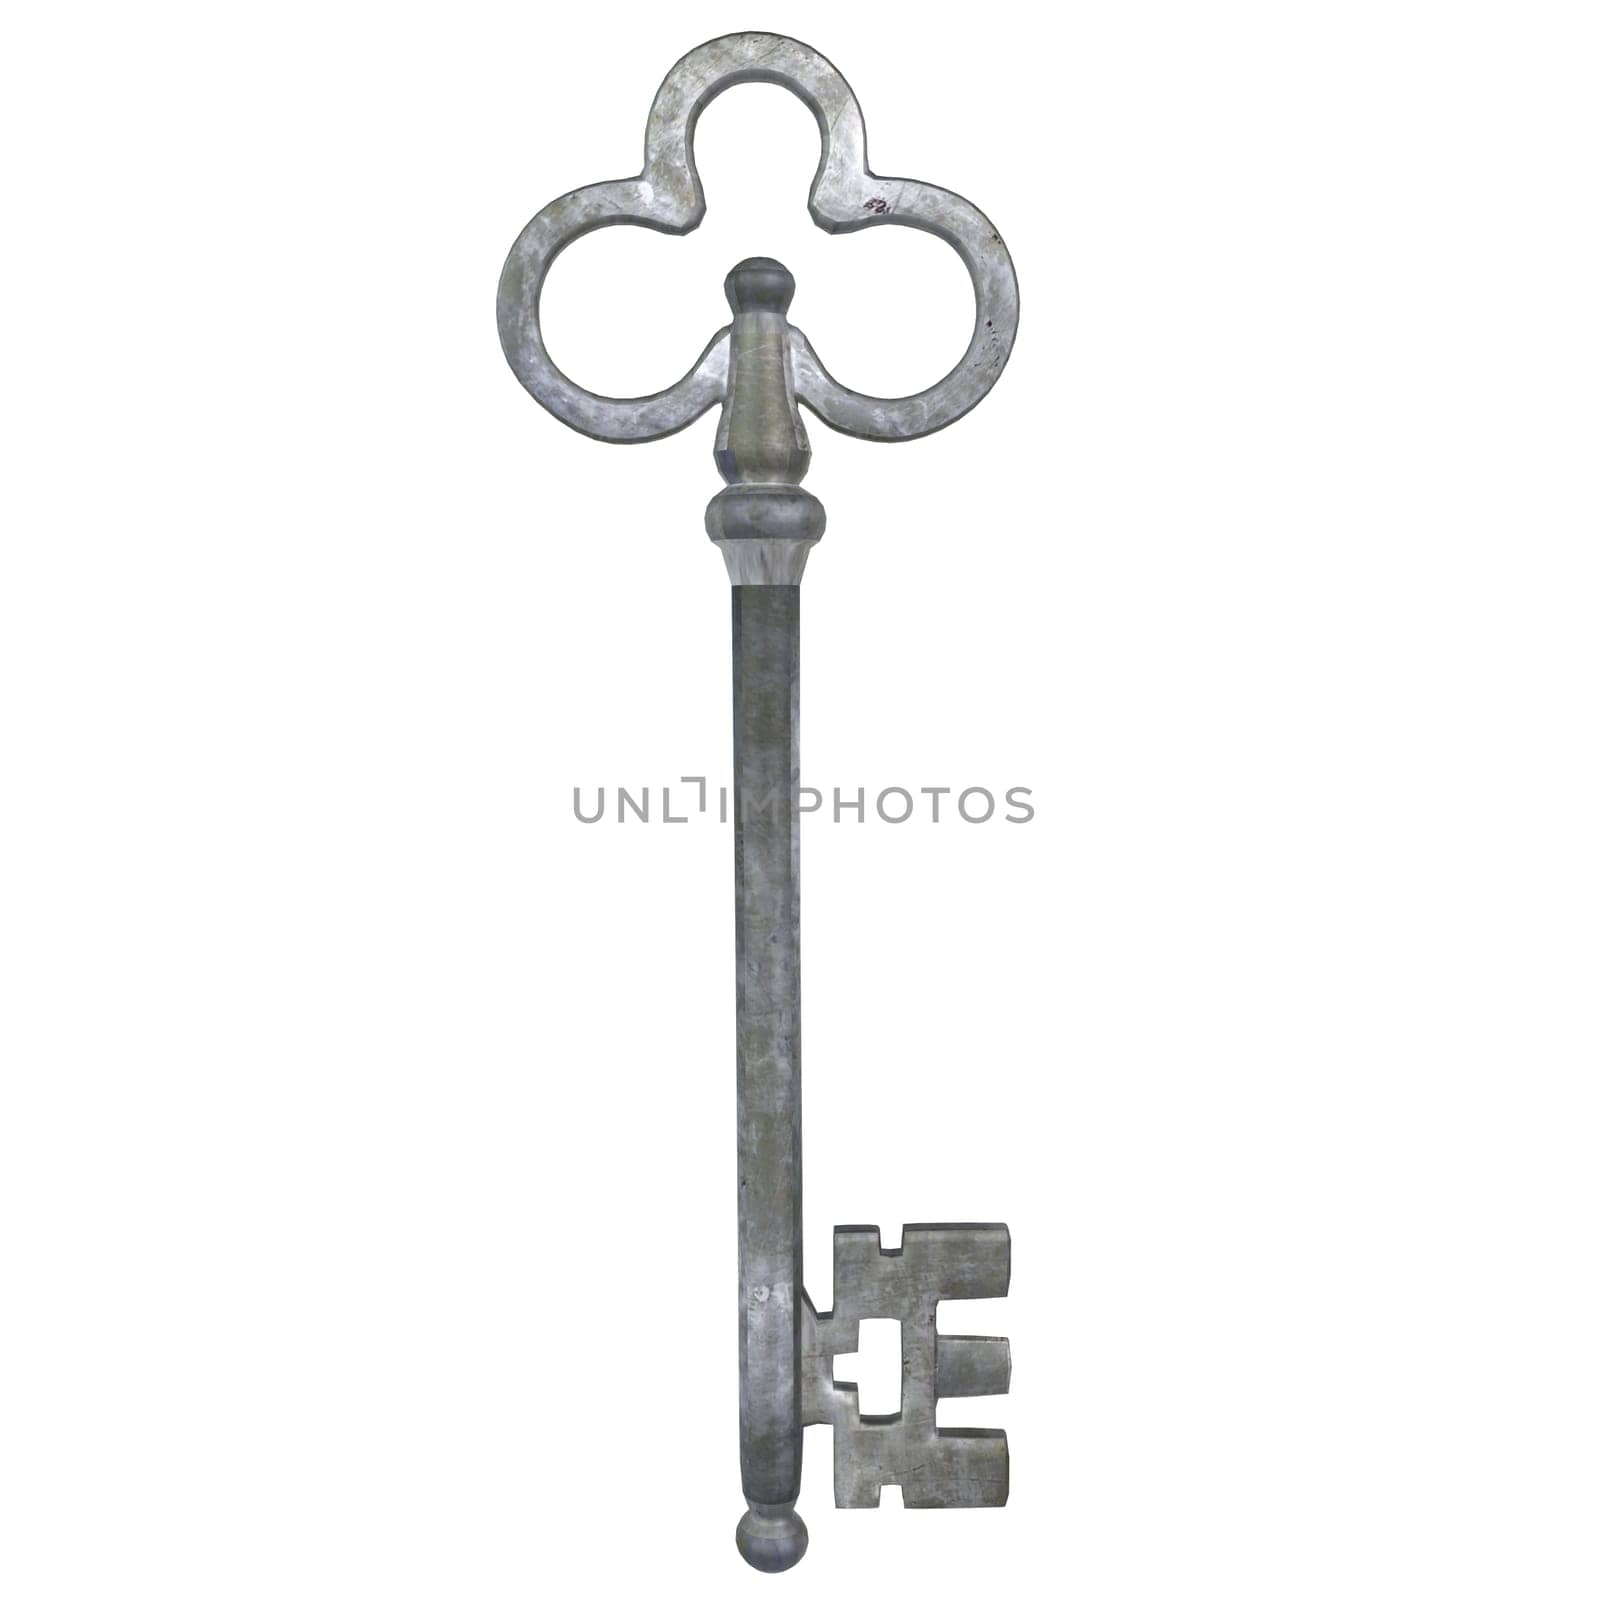 Old Key isolated on white background. High quality 3d illustration